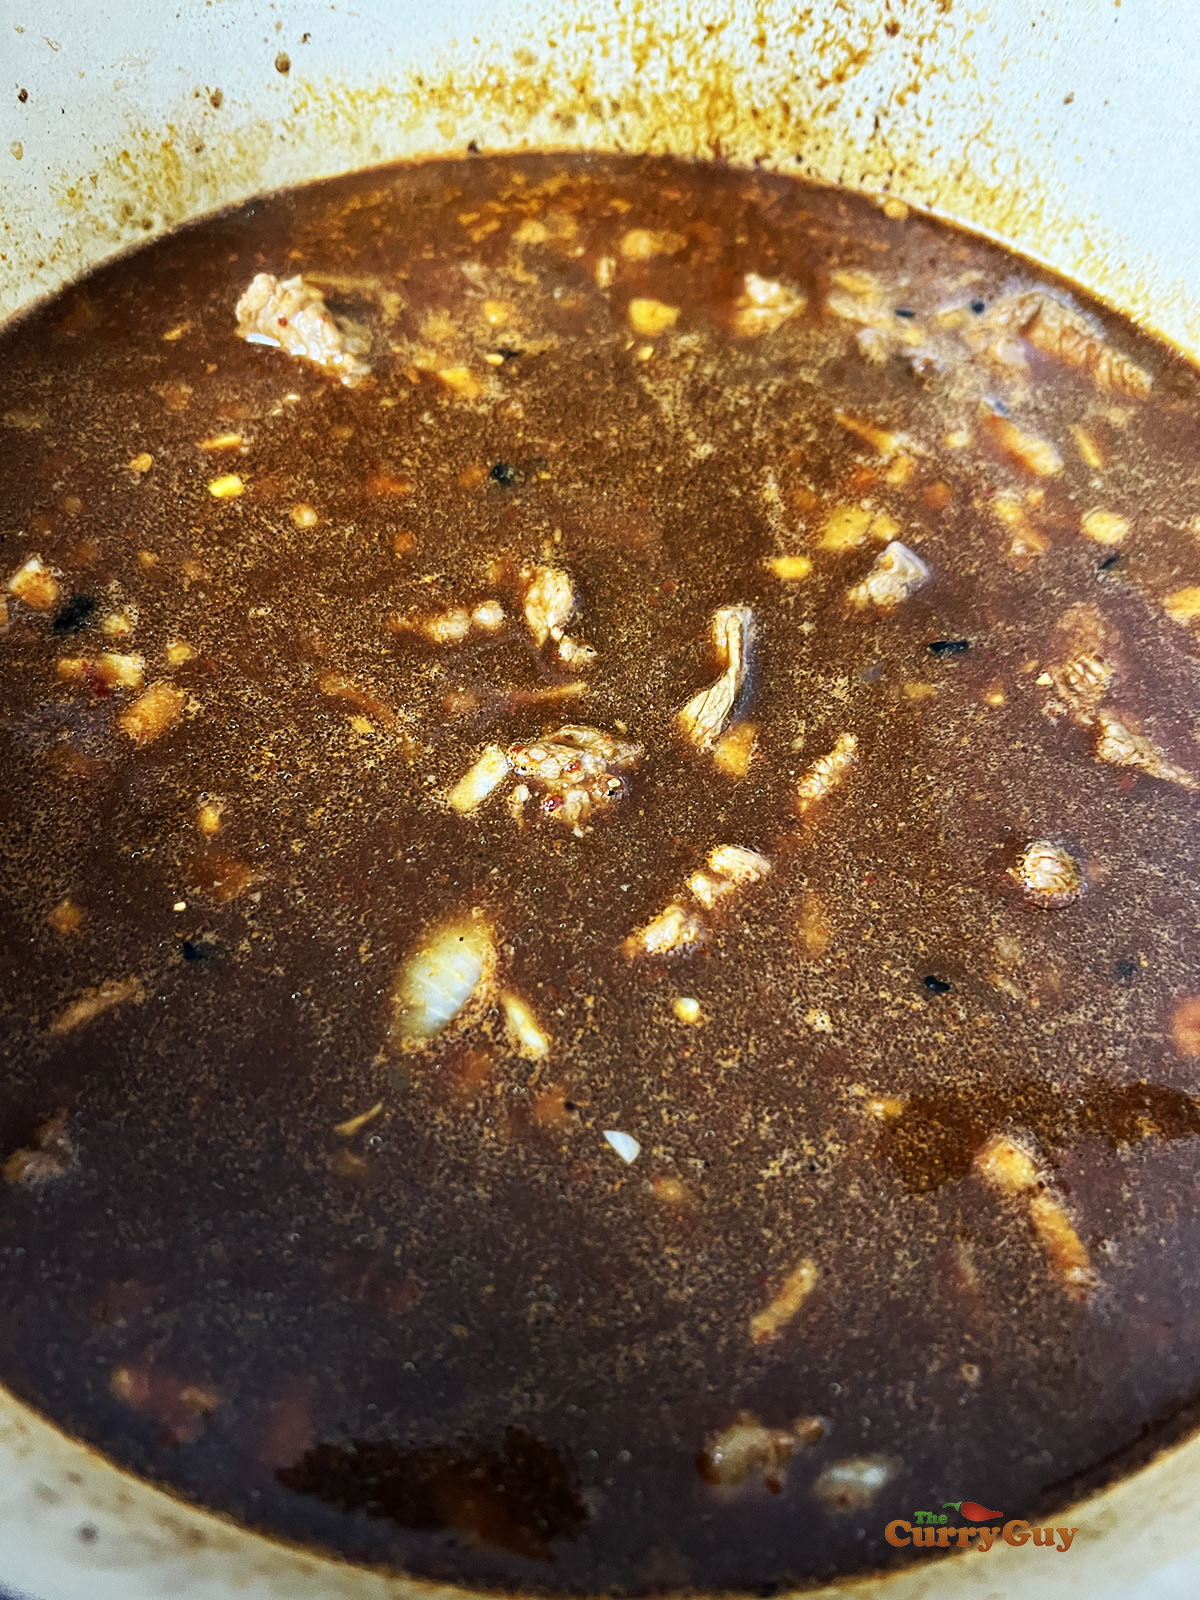 Adding stock and meat to the pot.